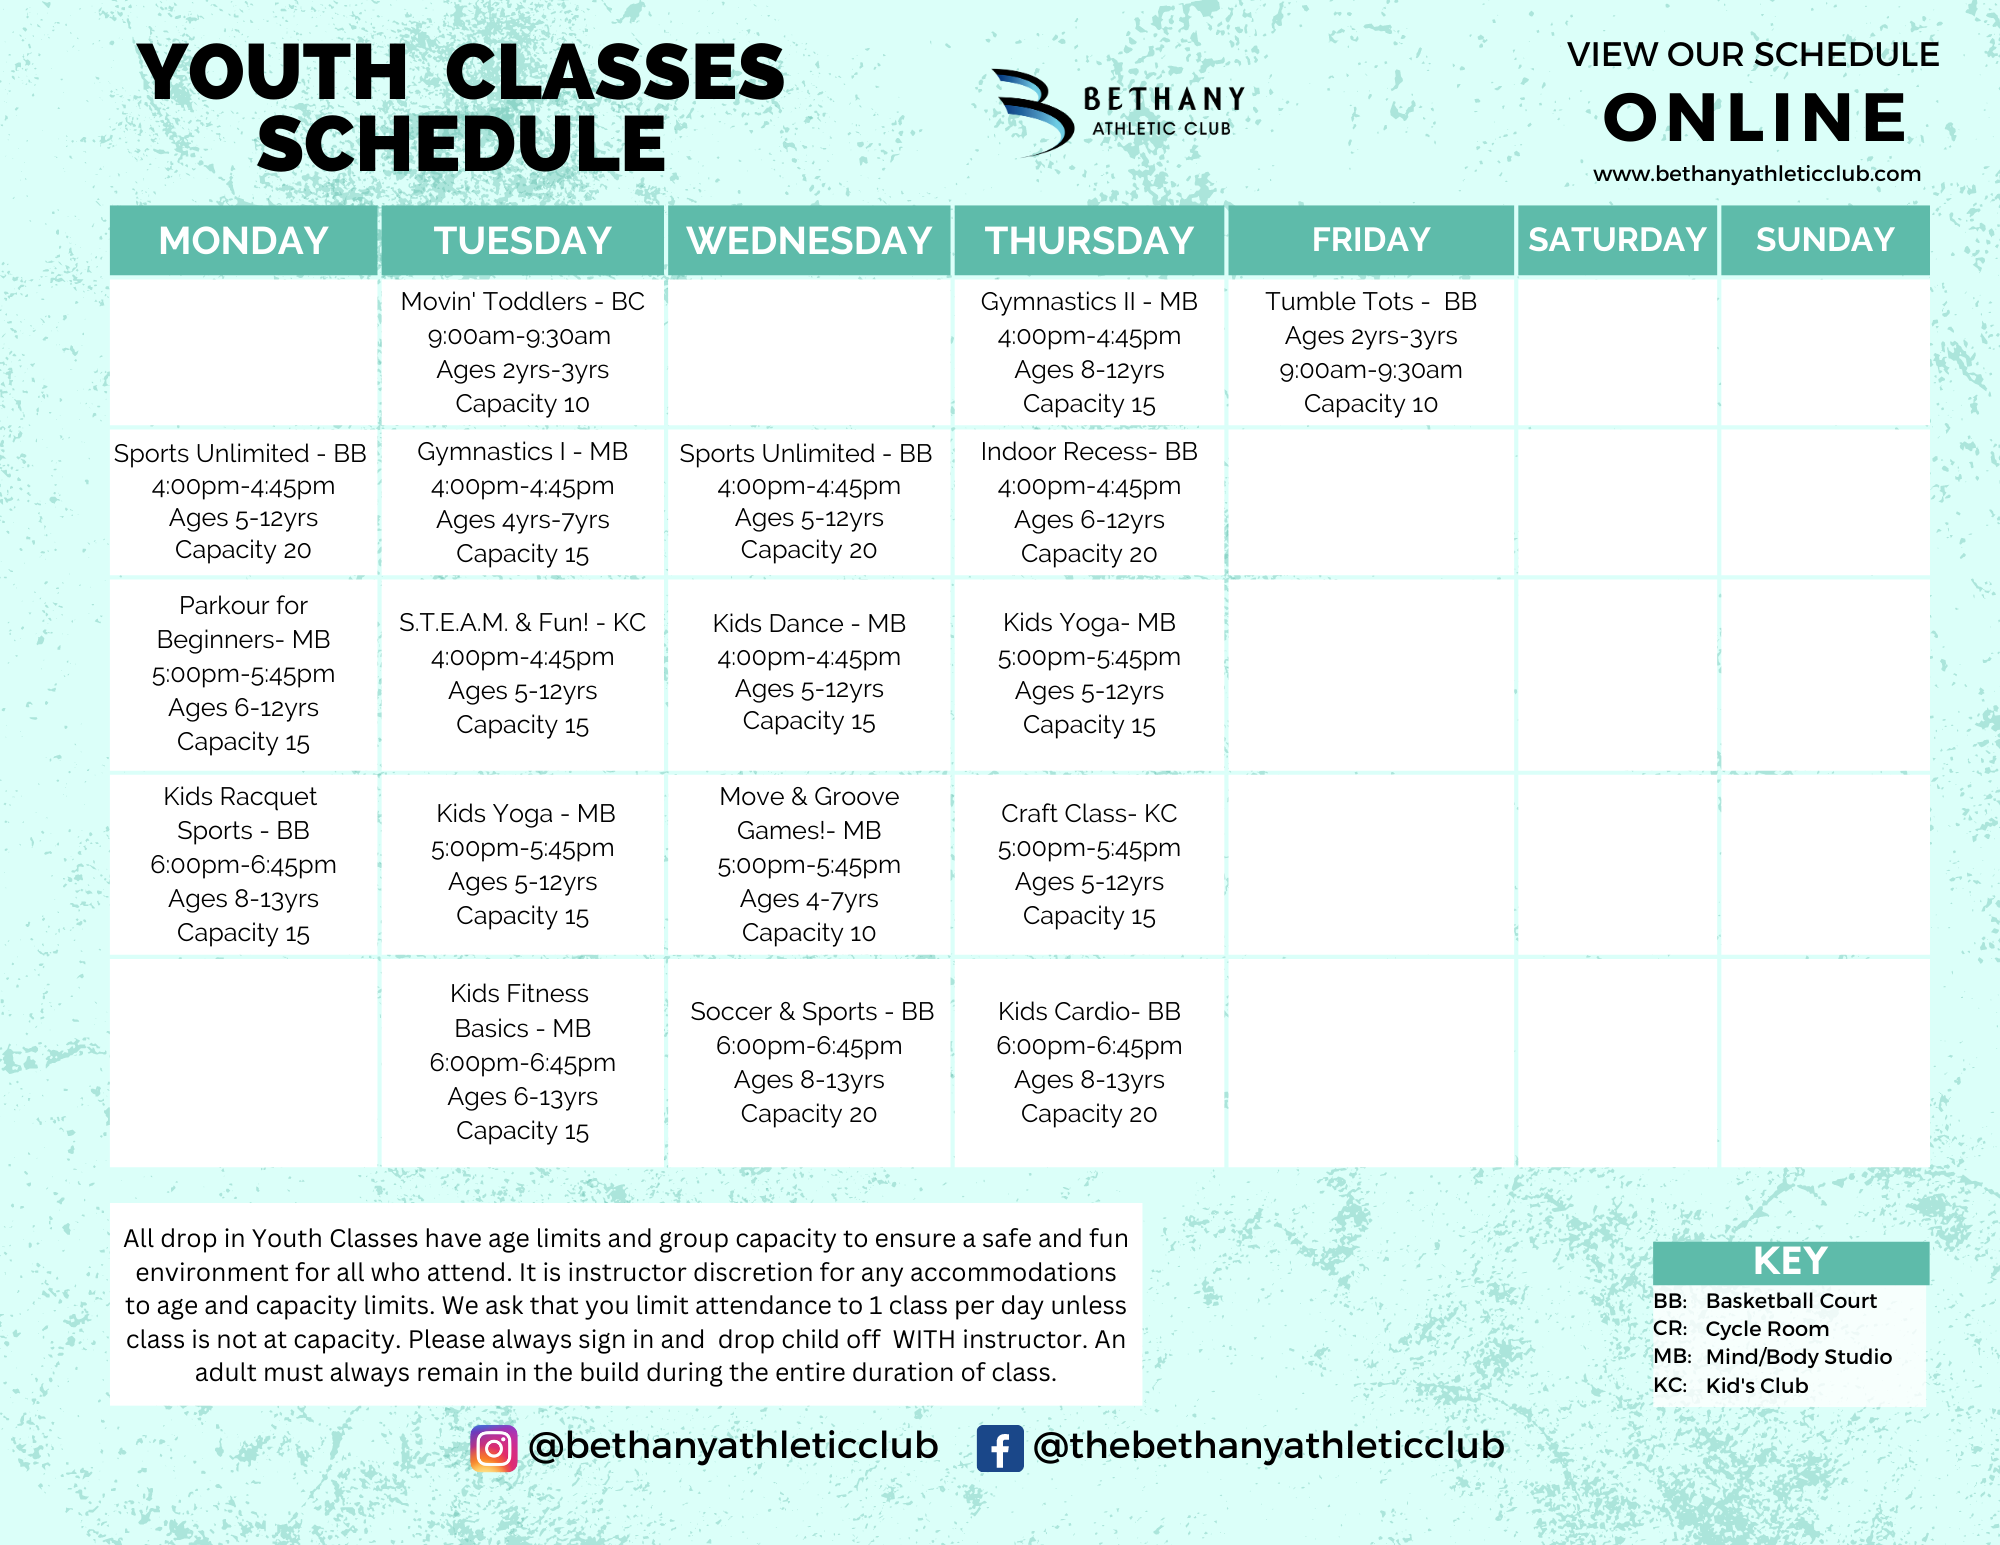 Youth Classes at Bethany Athletic Club